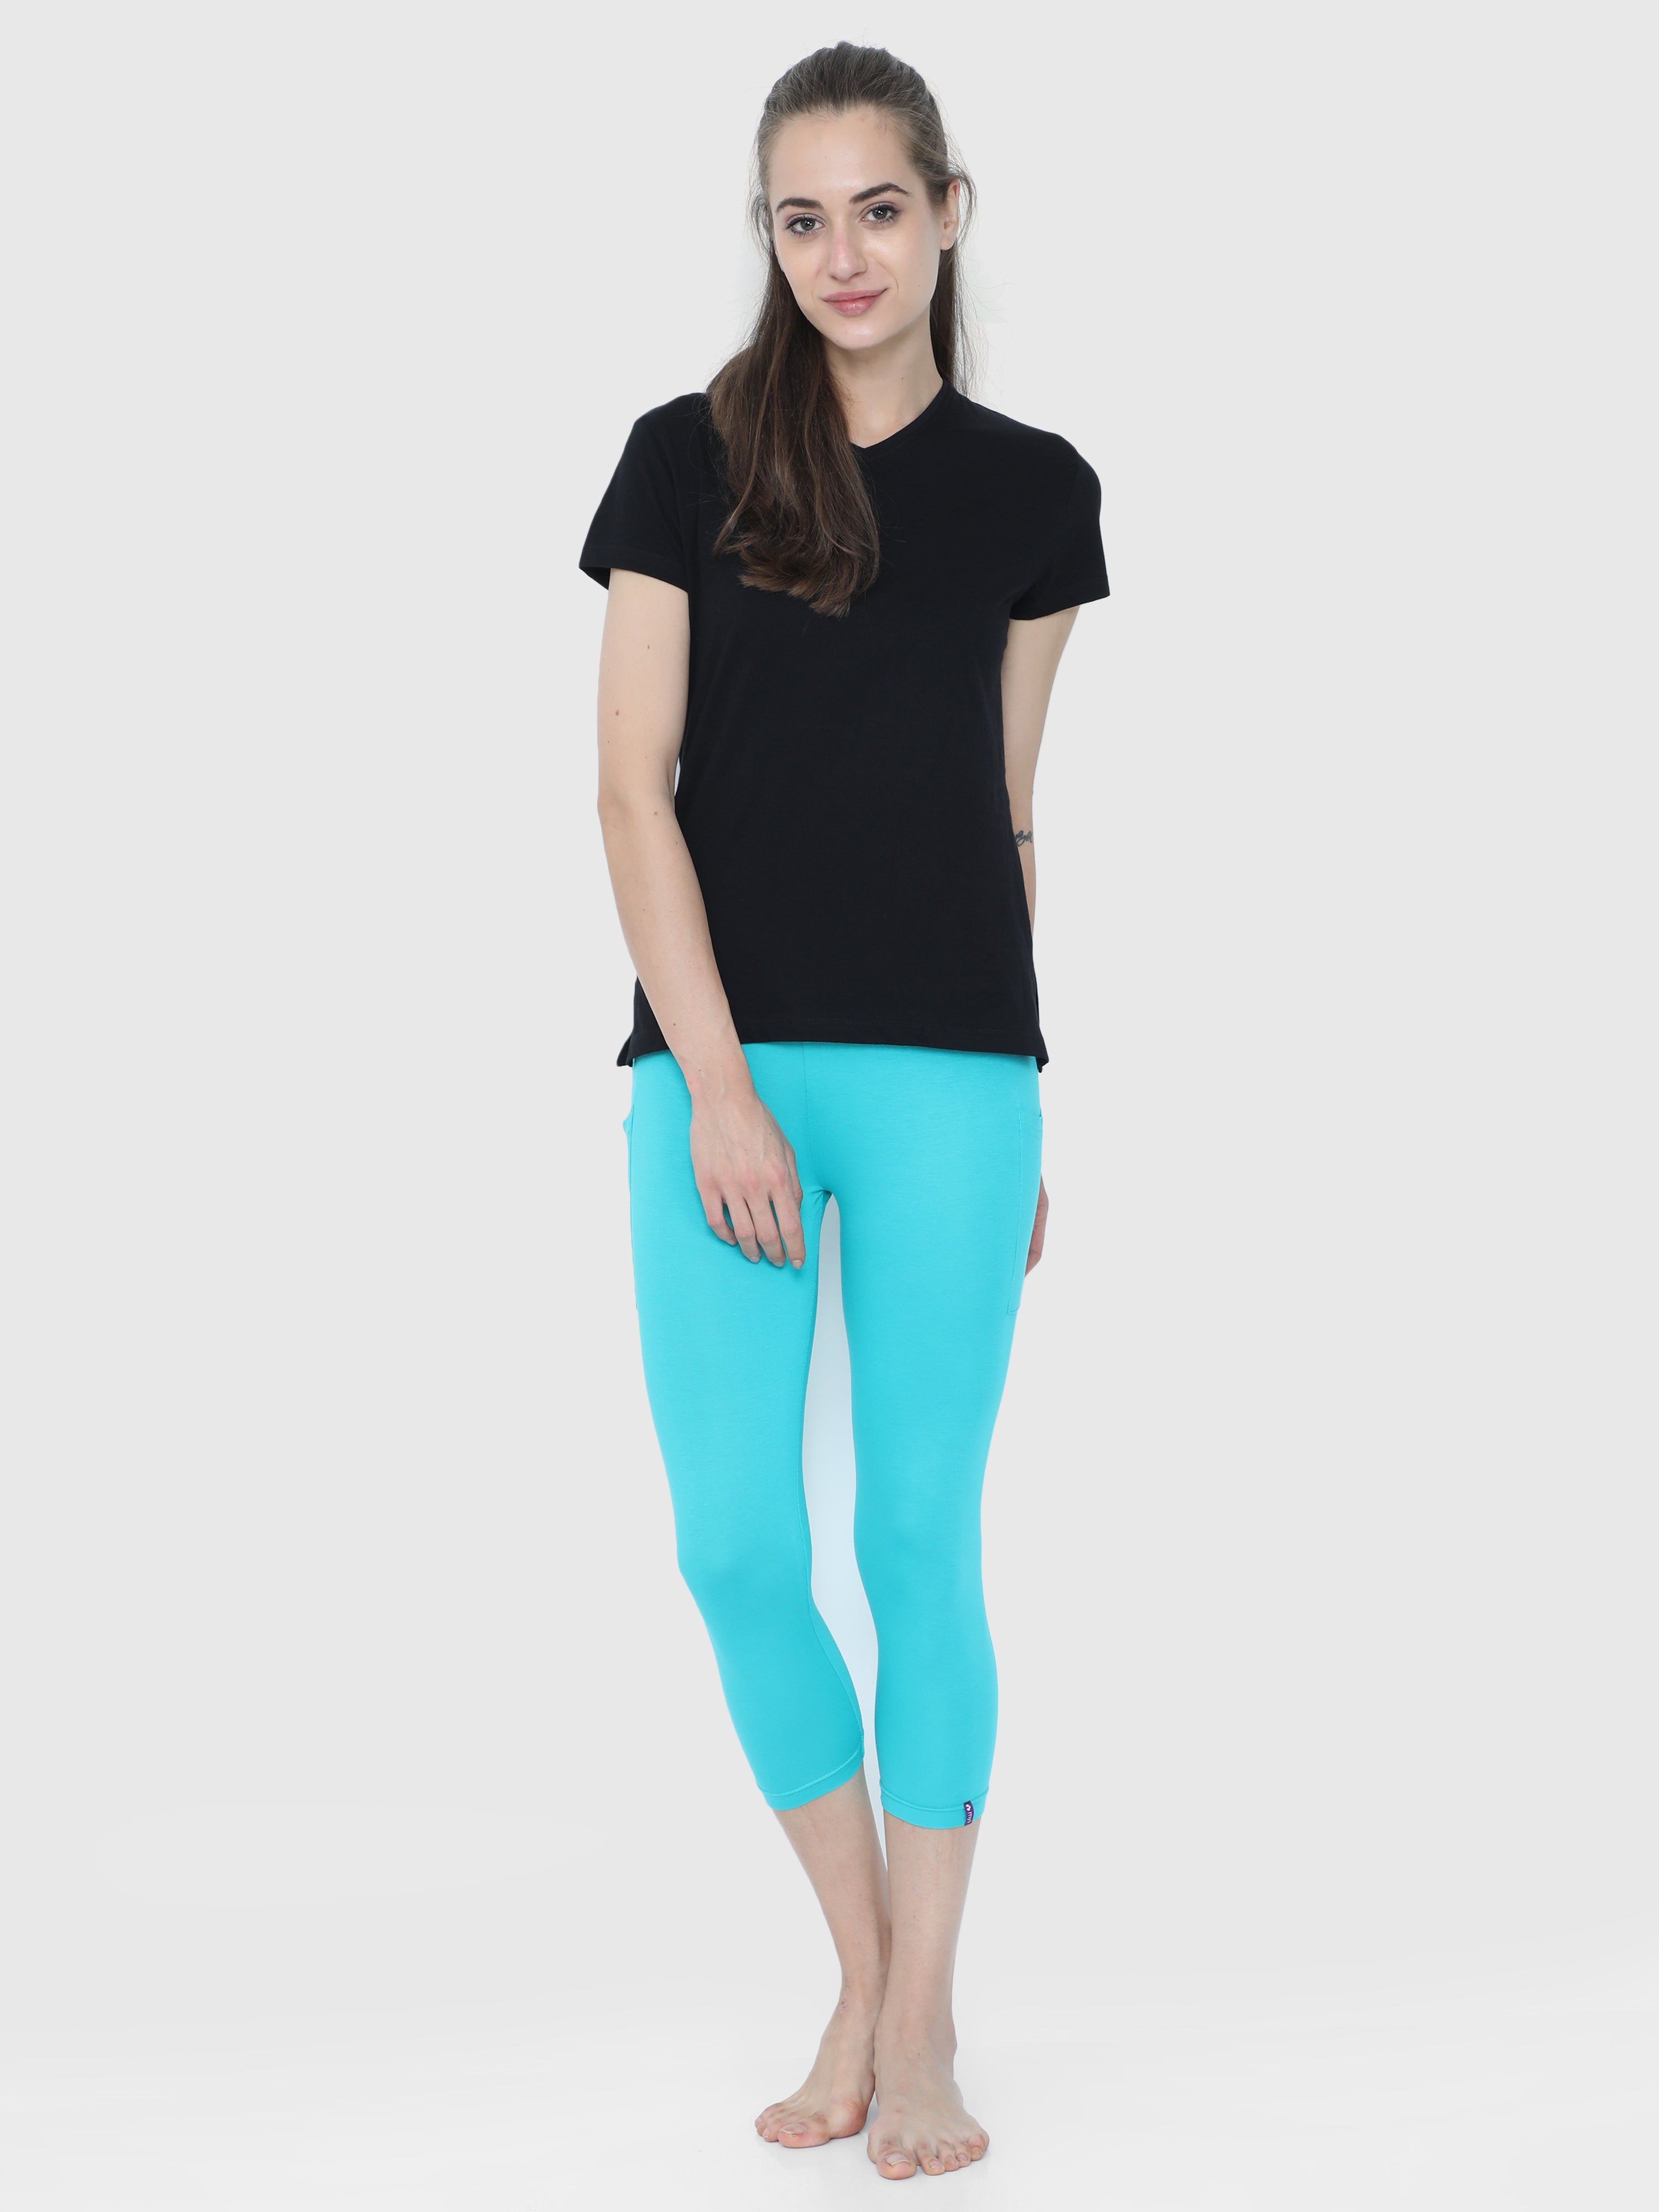 GOLDSTROMS Women Turquoise Blue Solid Ankle-Length Leggings Price in India,  Full Specifications & Offers | DTashion.com